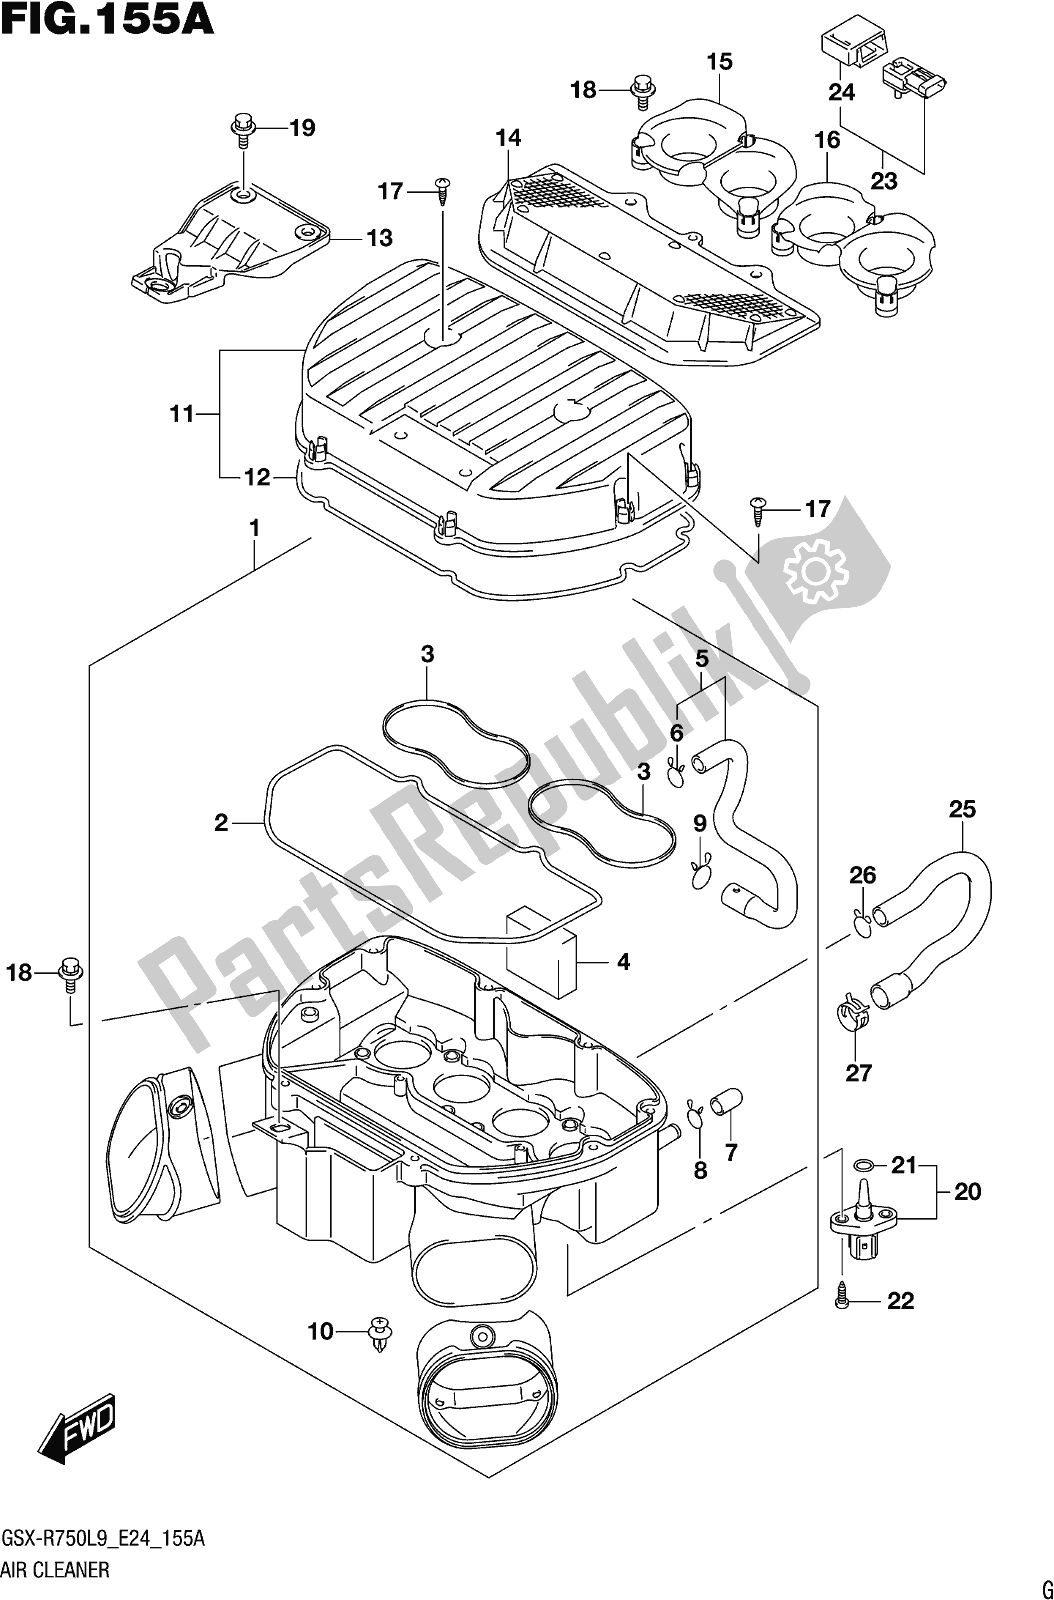 All parts for the Fig. 155a Air Cleaner of the Suzuki Gsx-r 750 2019